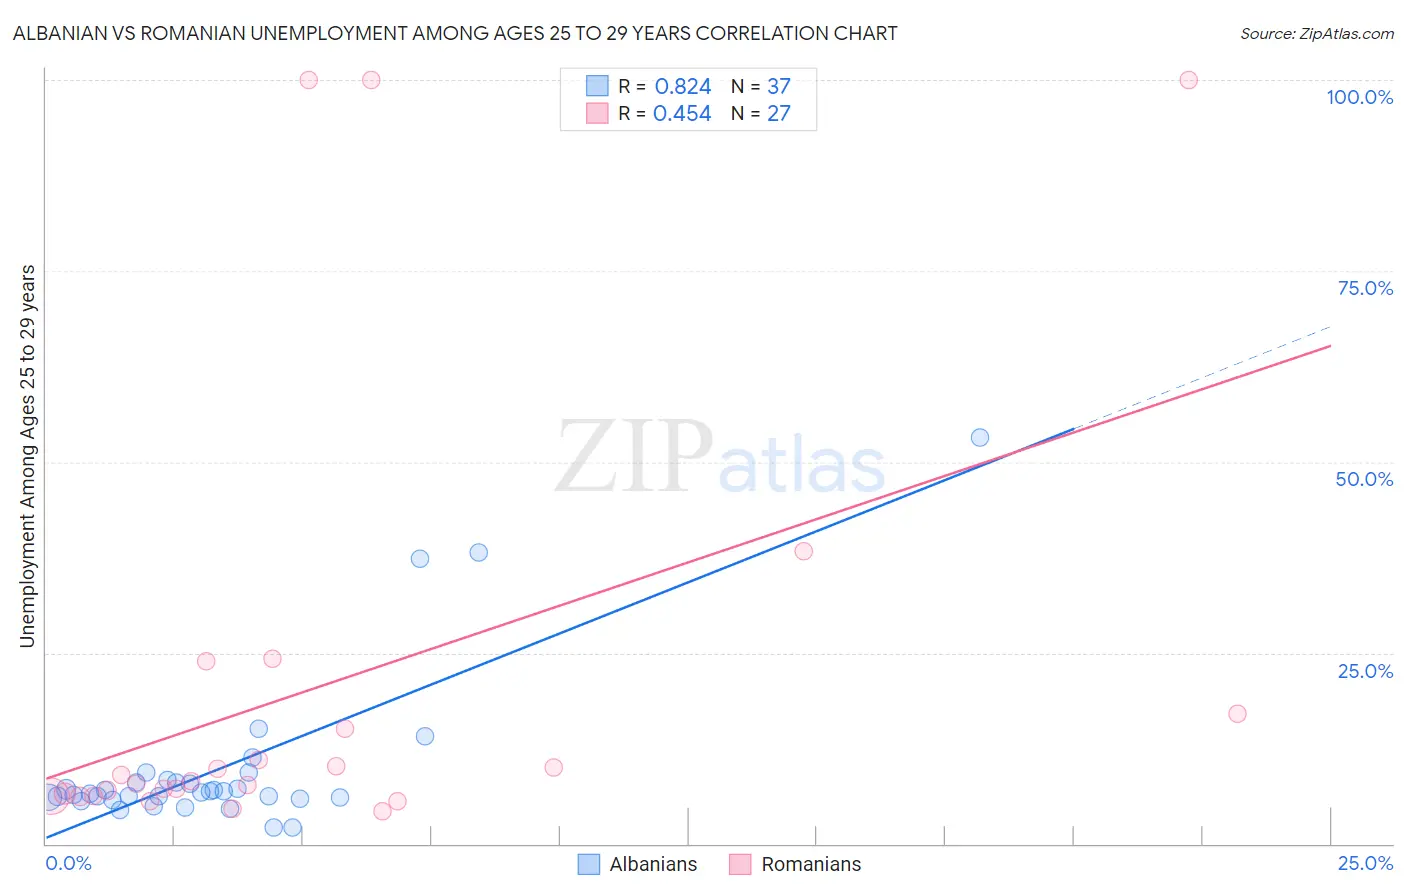 Albanian vs Romanian Unemployment Among Ages 25 to 29 years